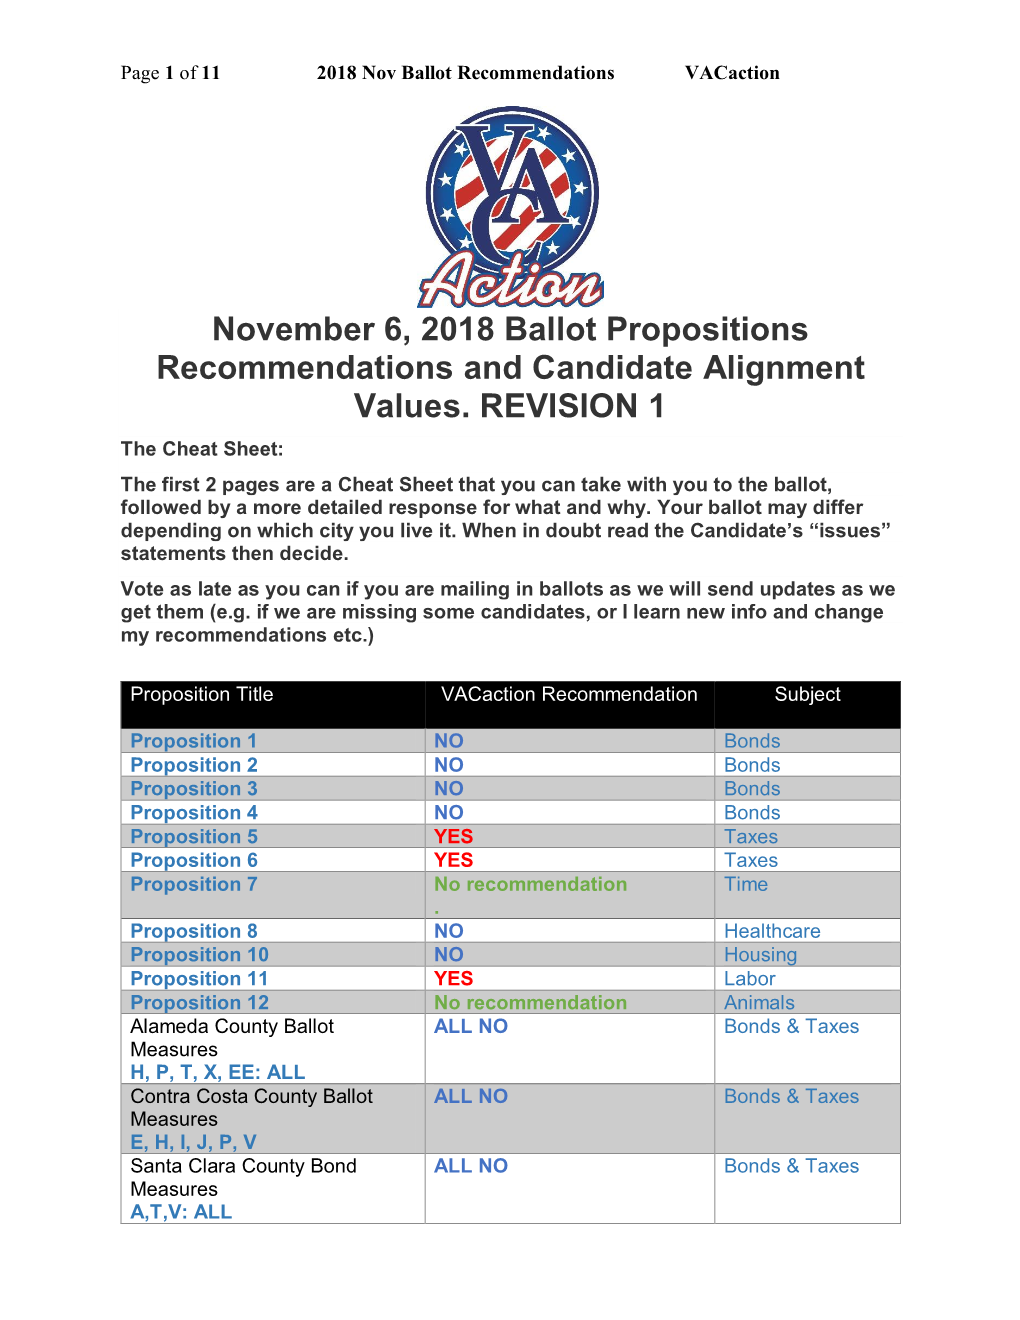 November 6, 2018 Ballot Propositions Recommendations and Candidate Alignment Values